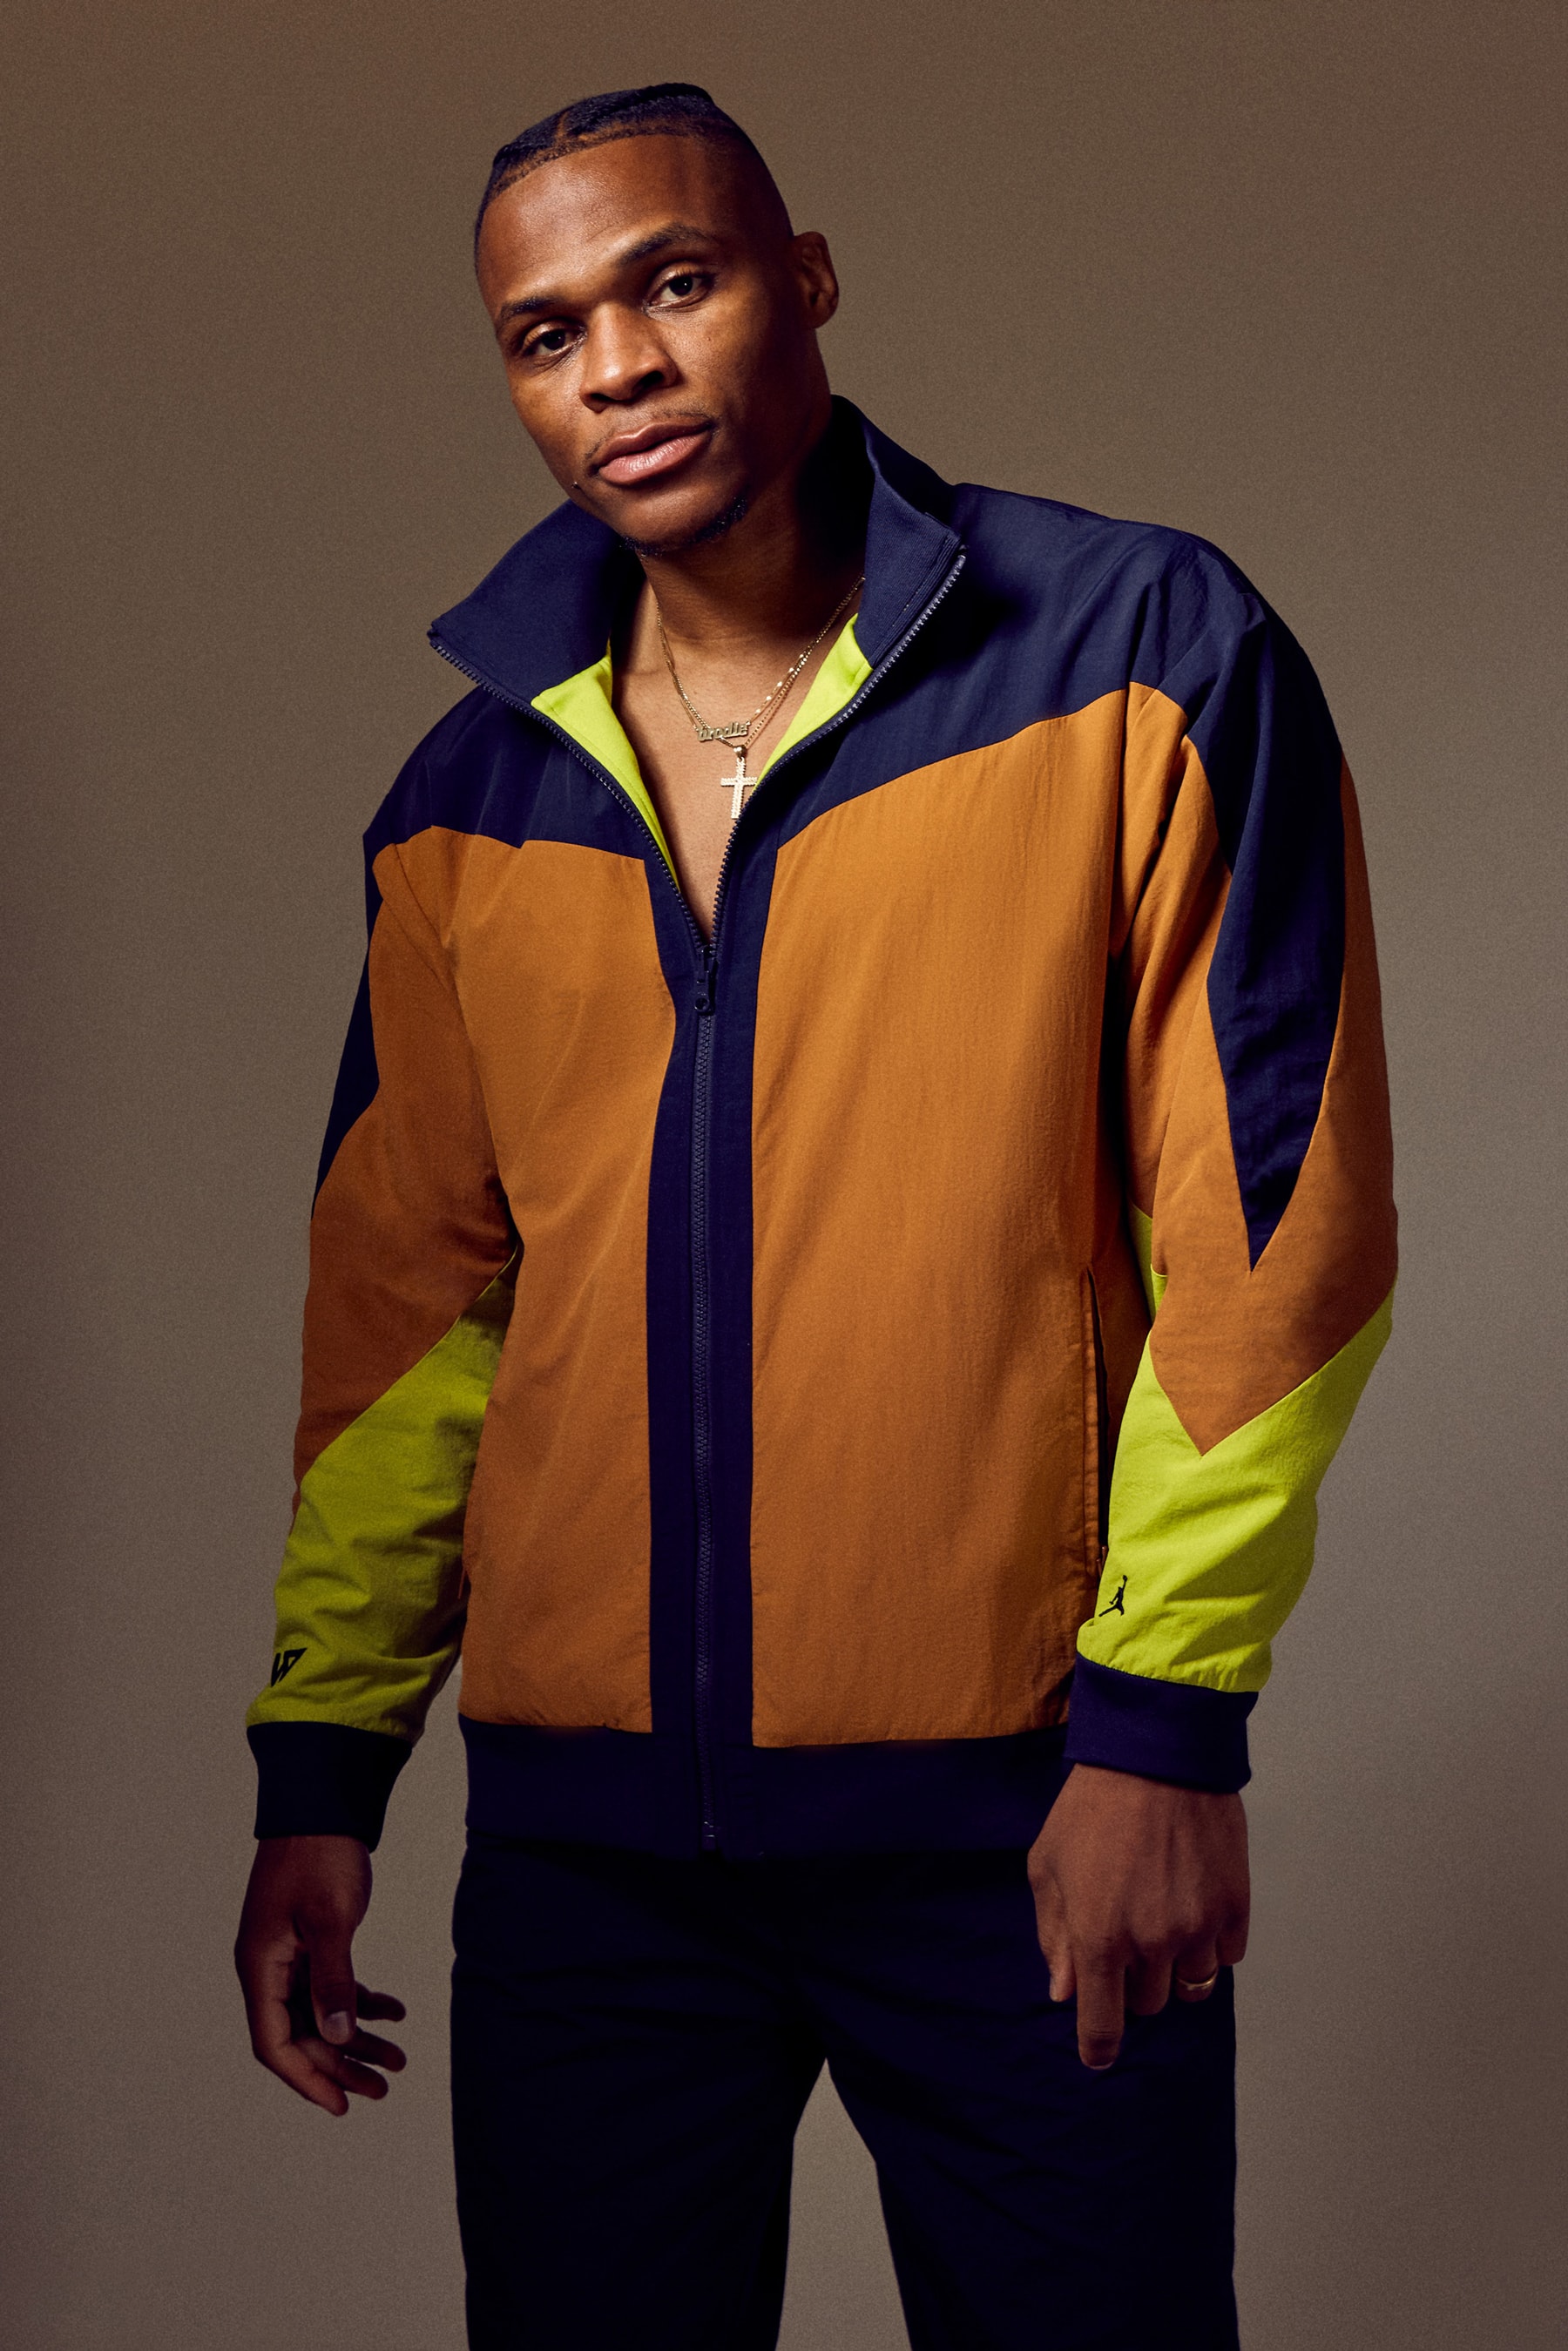 Russell Westbrook x Jordan Brand x Opening Ceremony Holiday 2019 apparel collection collaborations basketball sports athleisure nikelab Carol Lim Humberto Leon